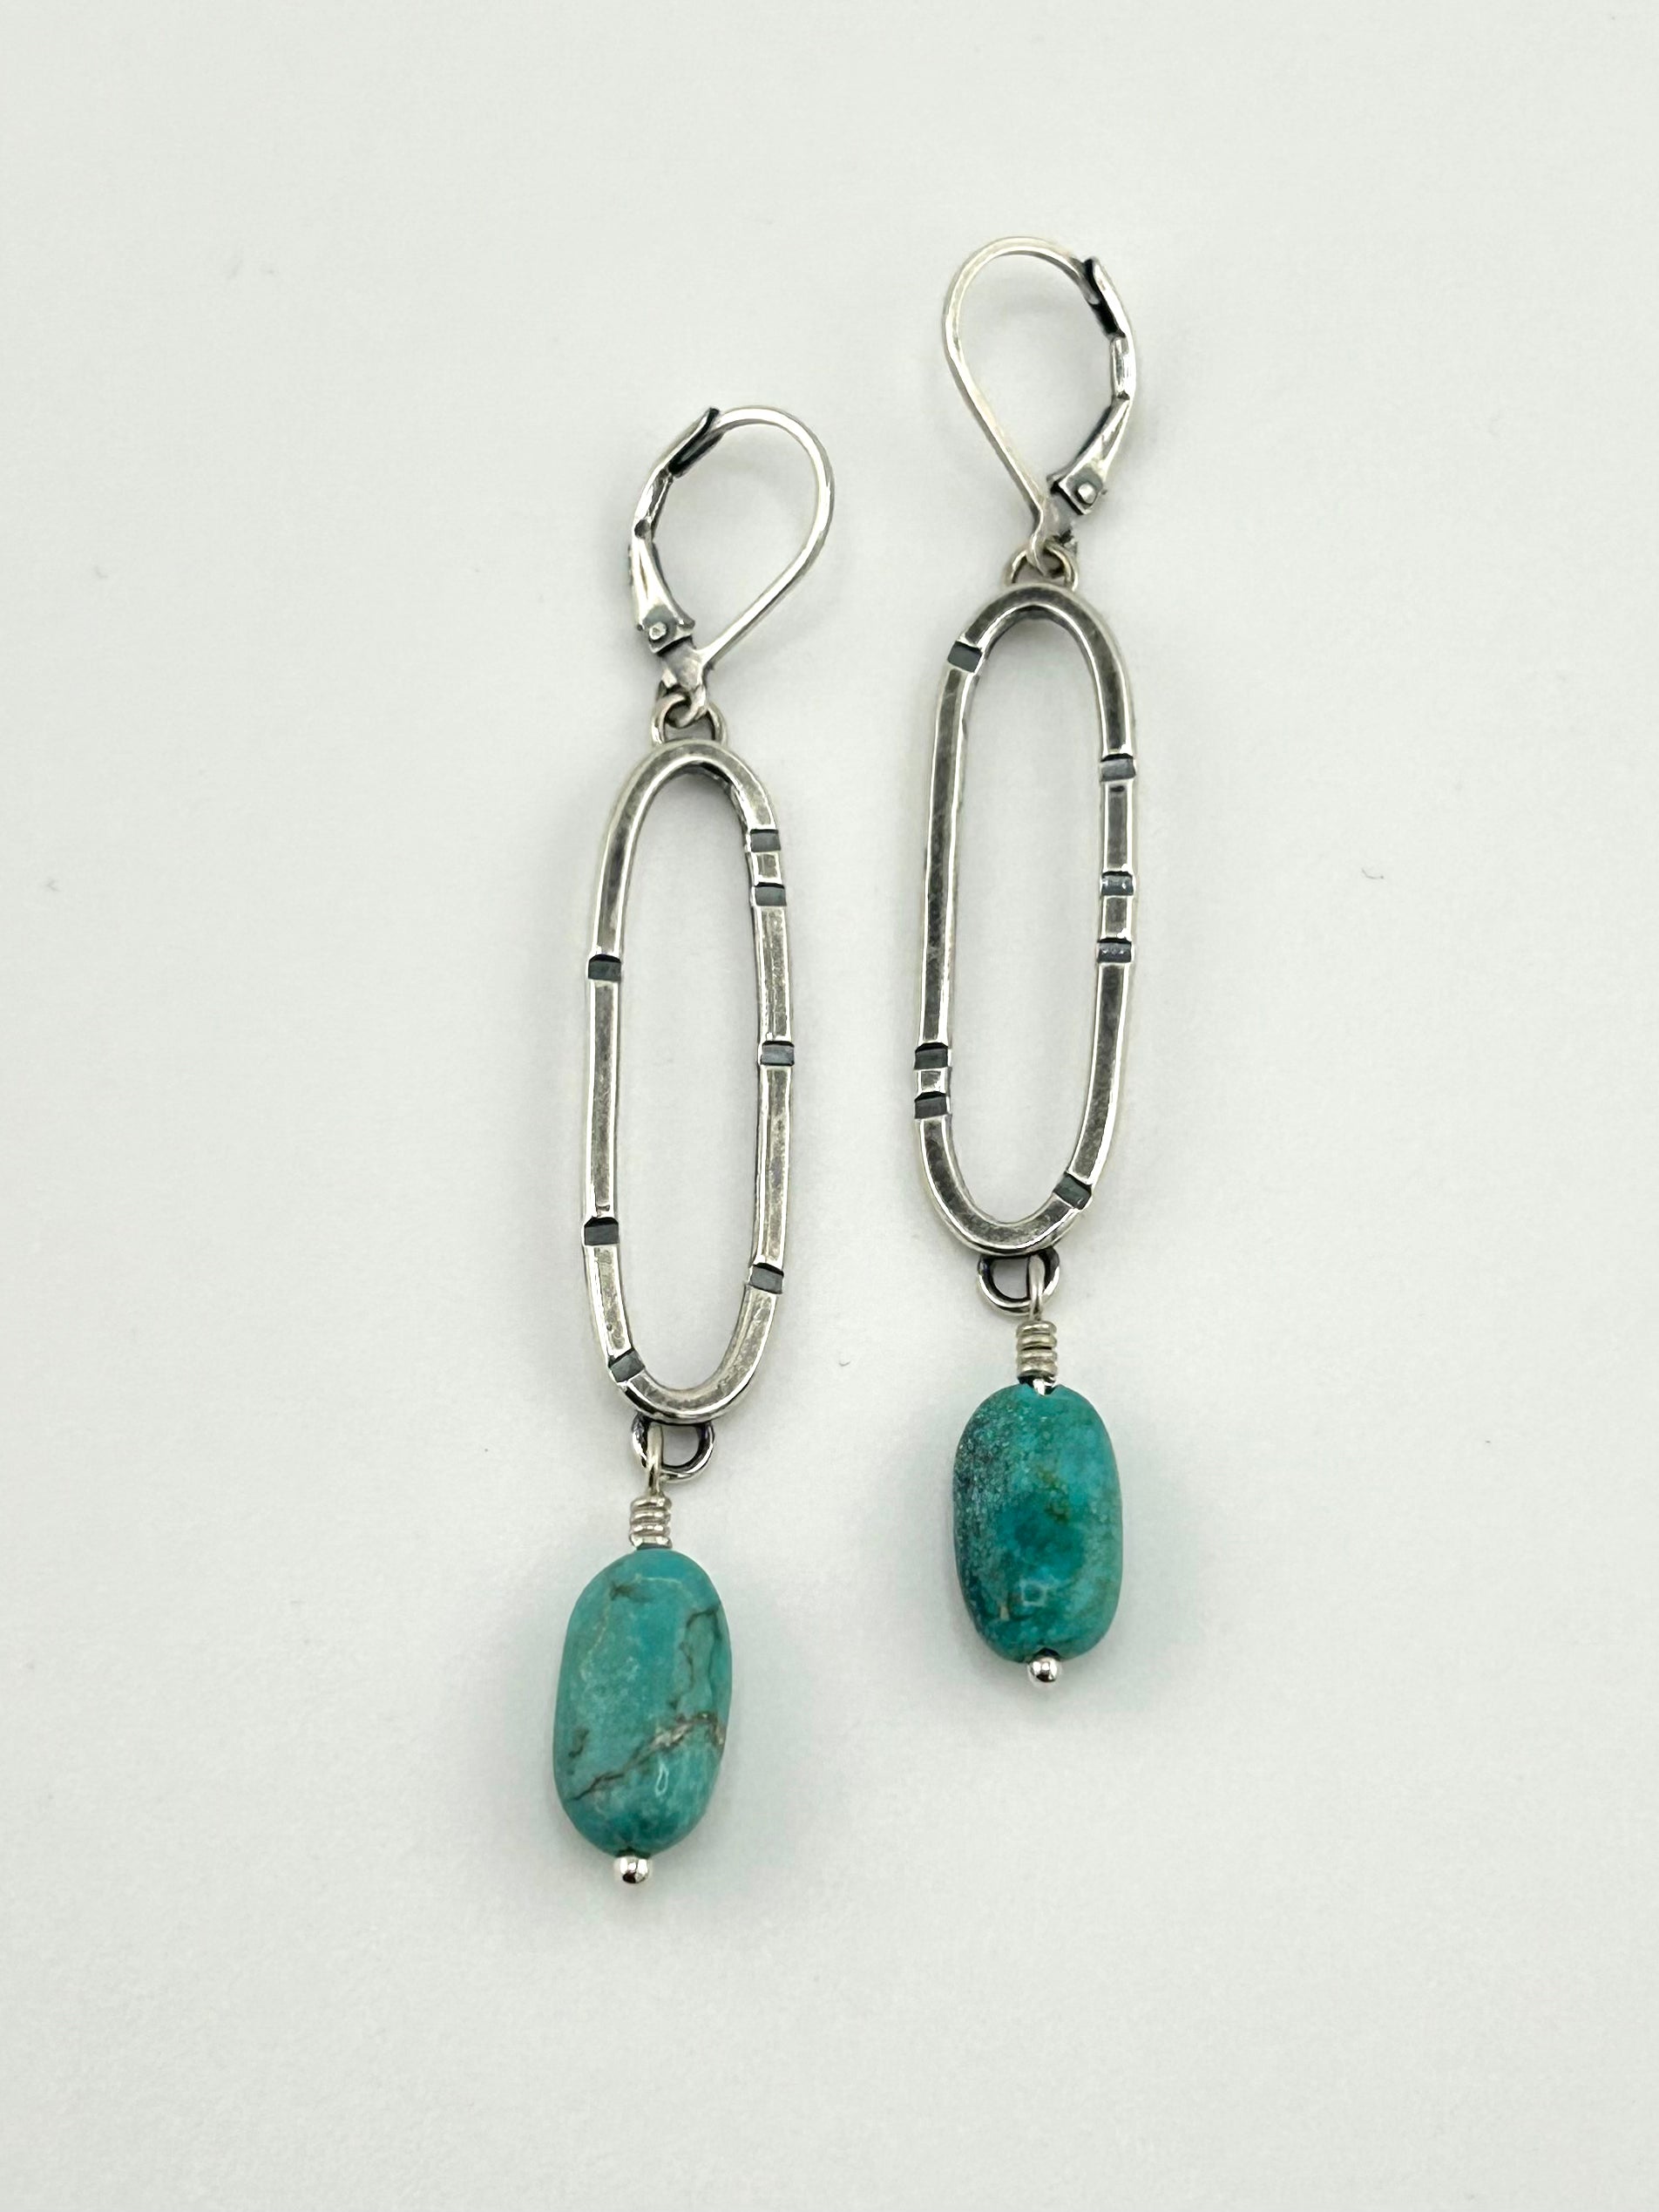 Anvil Hoop Earrings with Stamped Sterling Silver and Turquoise